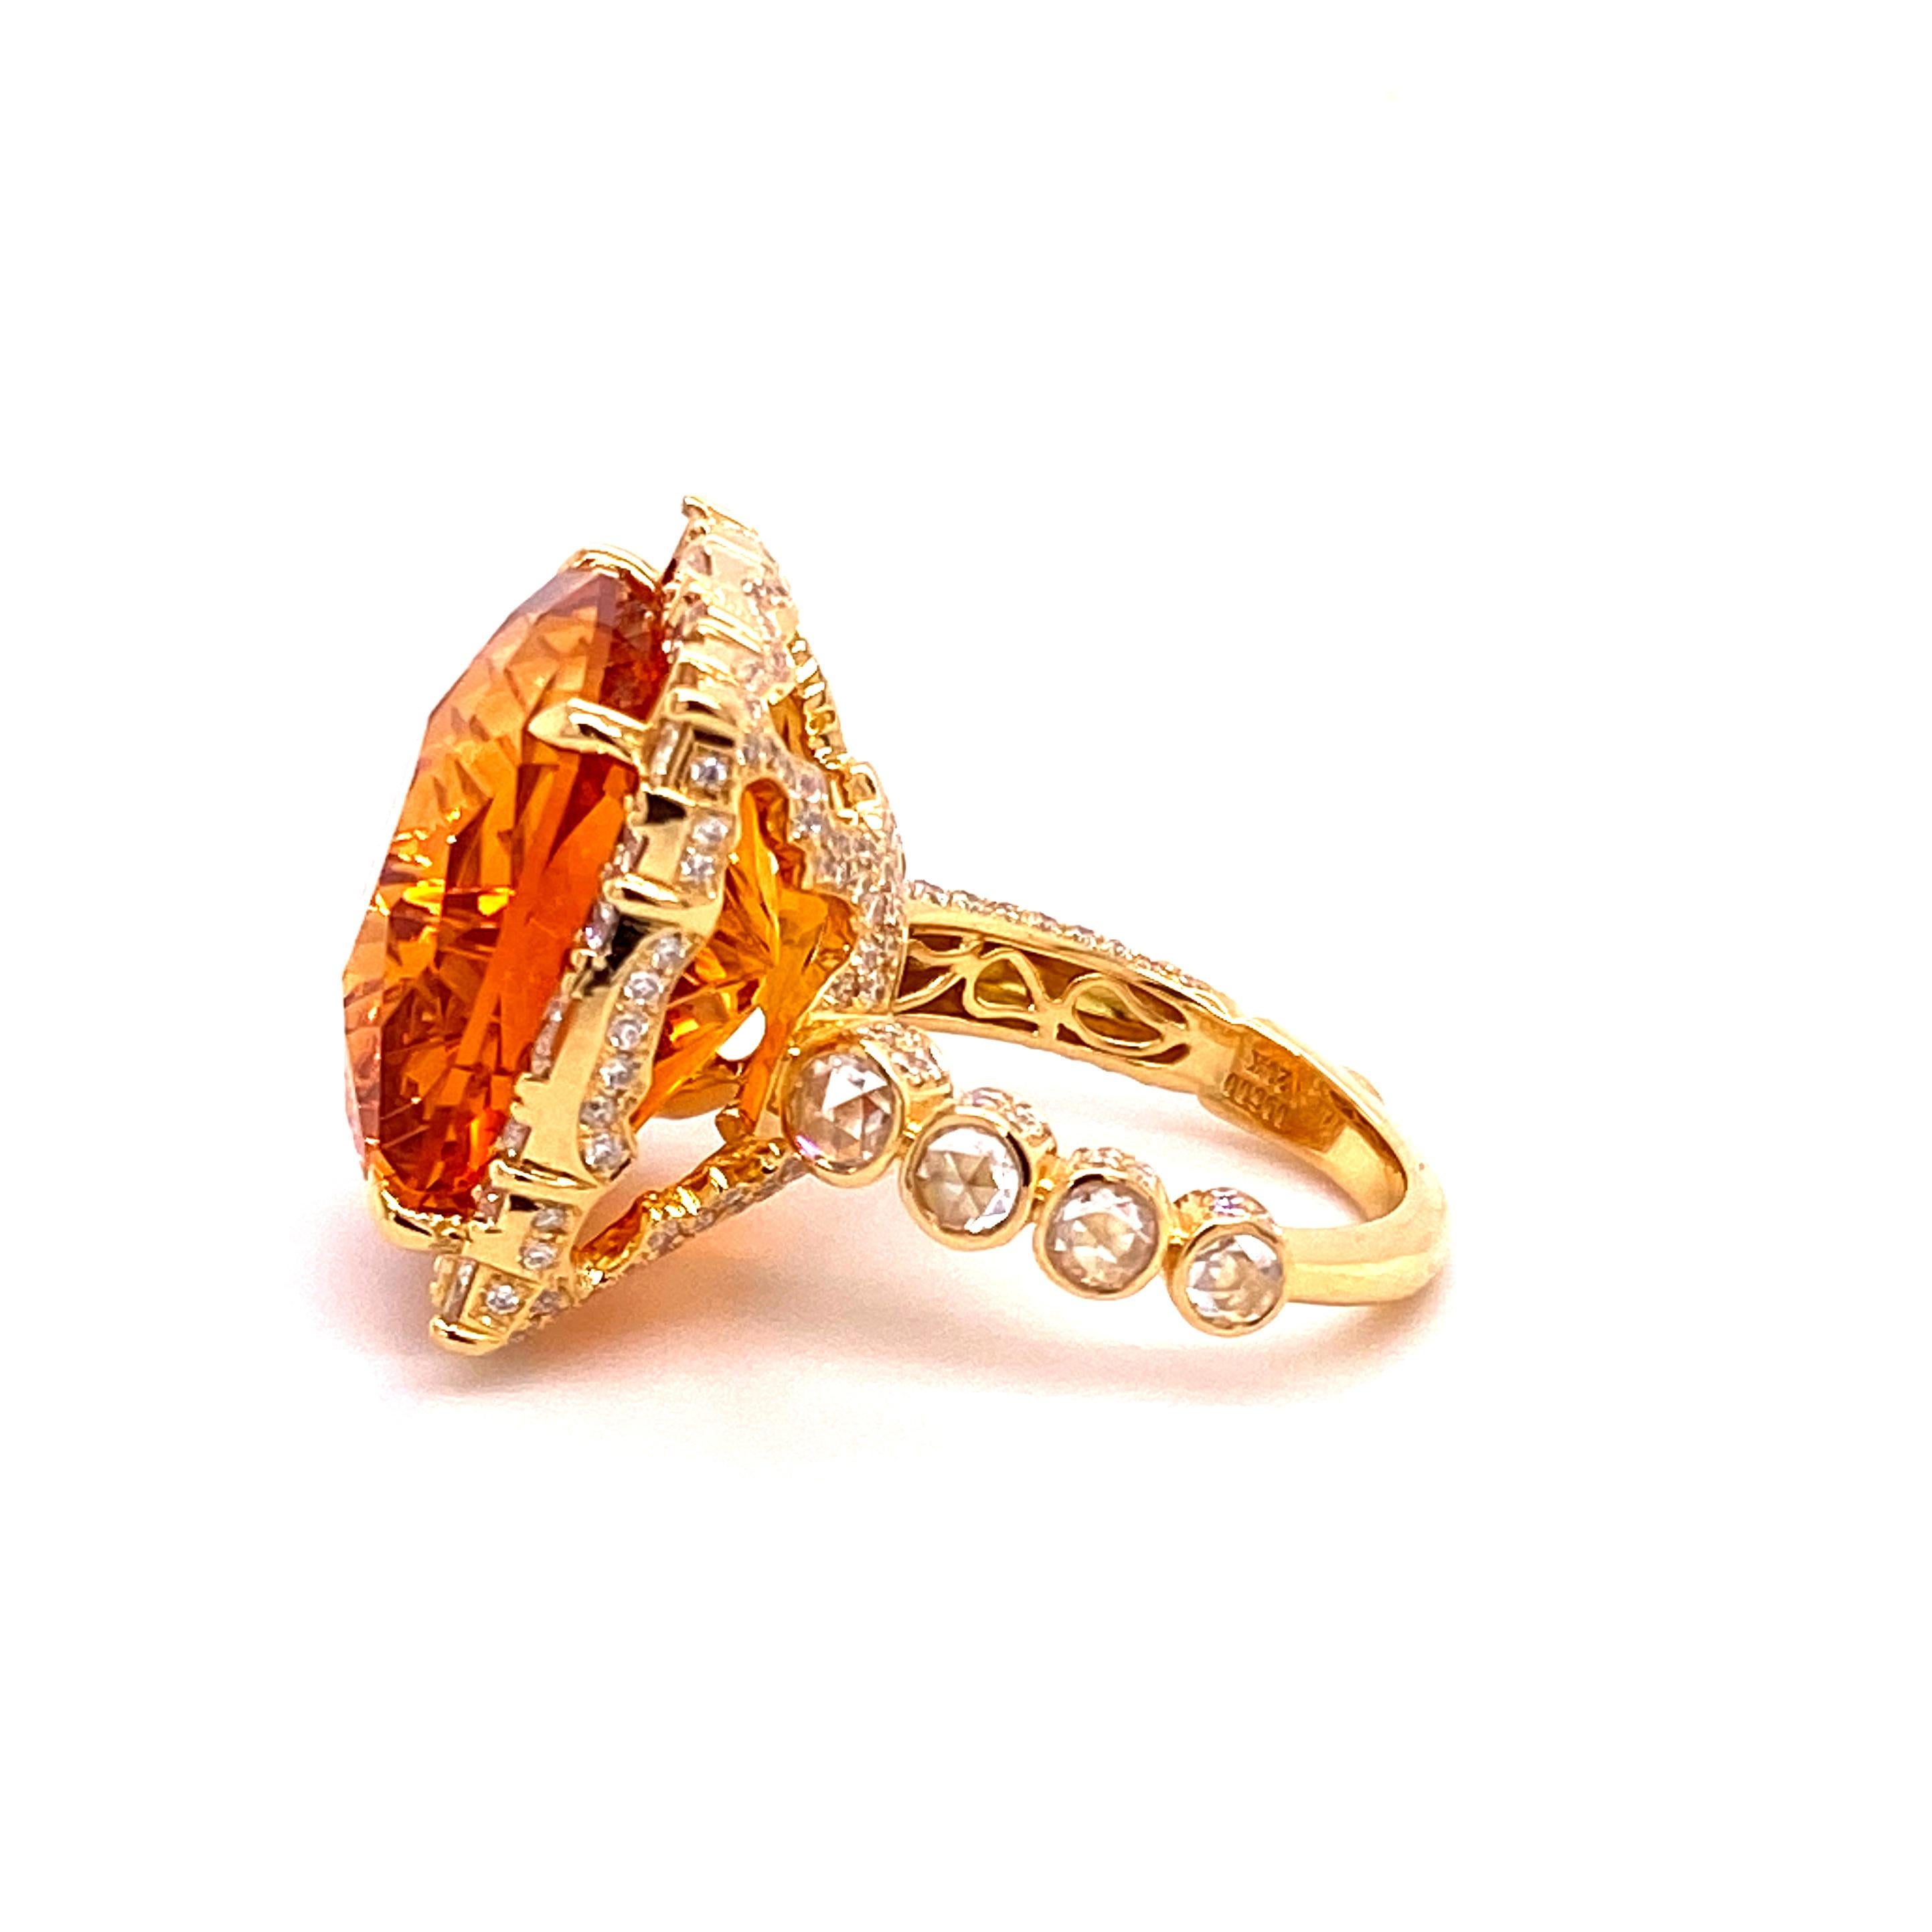 COOMI Madeira Citrine and Diamond Cocktail Ring set in 20k Yellow Gold. 29.15ct Madeira Citrine uniquely faceted with a starburst design. 3.79cts of diamonds surrounding, and underneath the citrine. This ring comes standard in a size 7 but can be